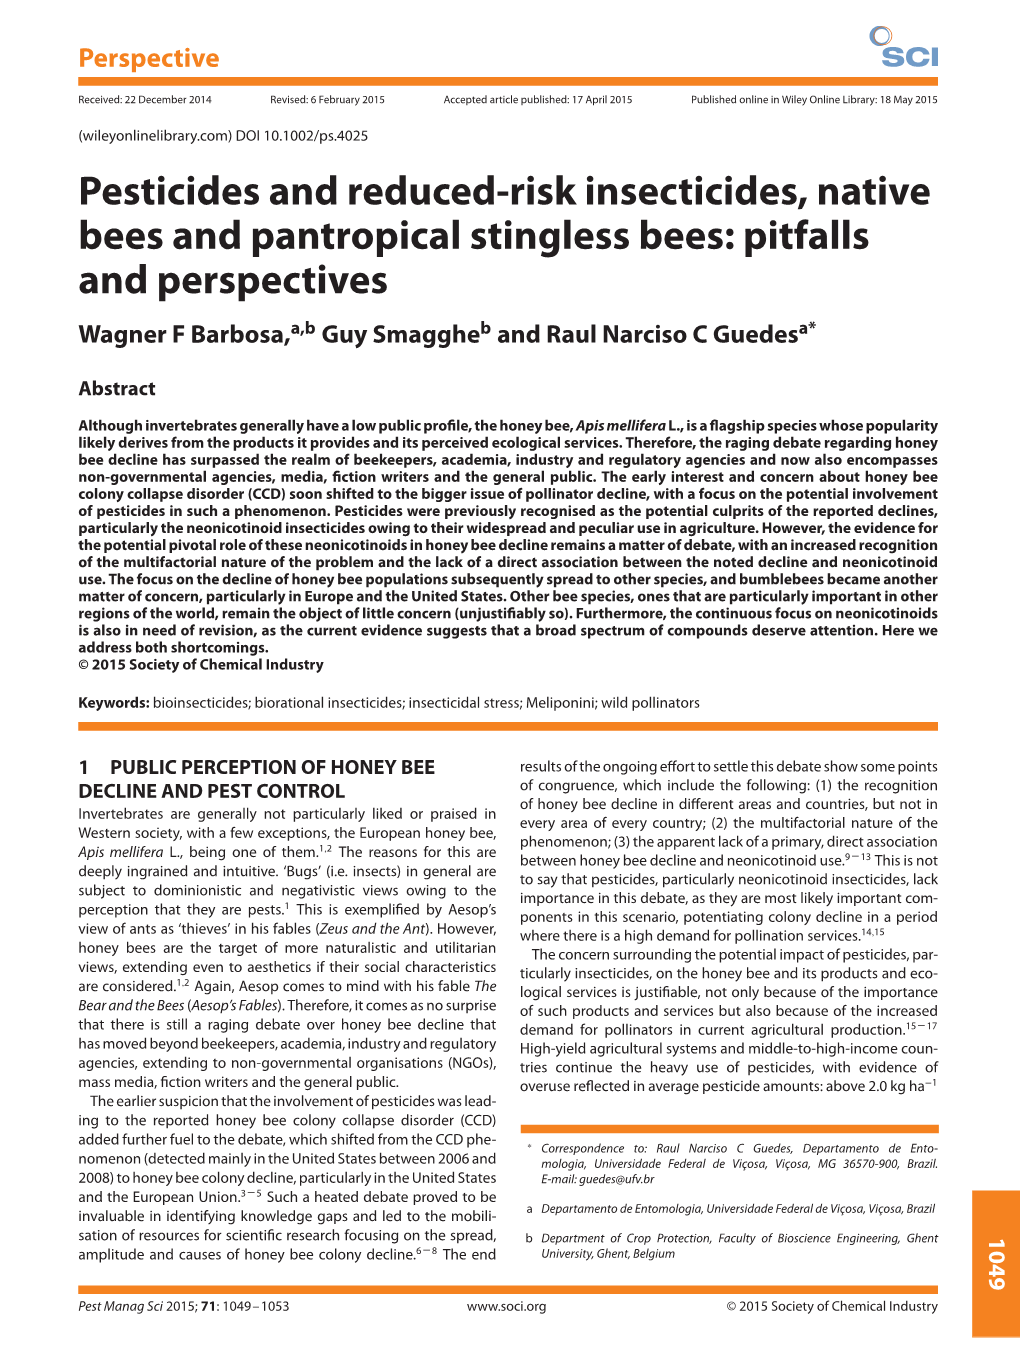 Pesticides and Reduced-Risk Insecticides, Native Bees And